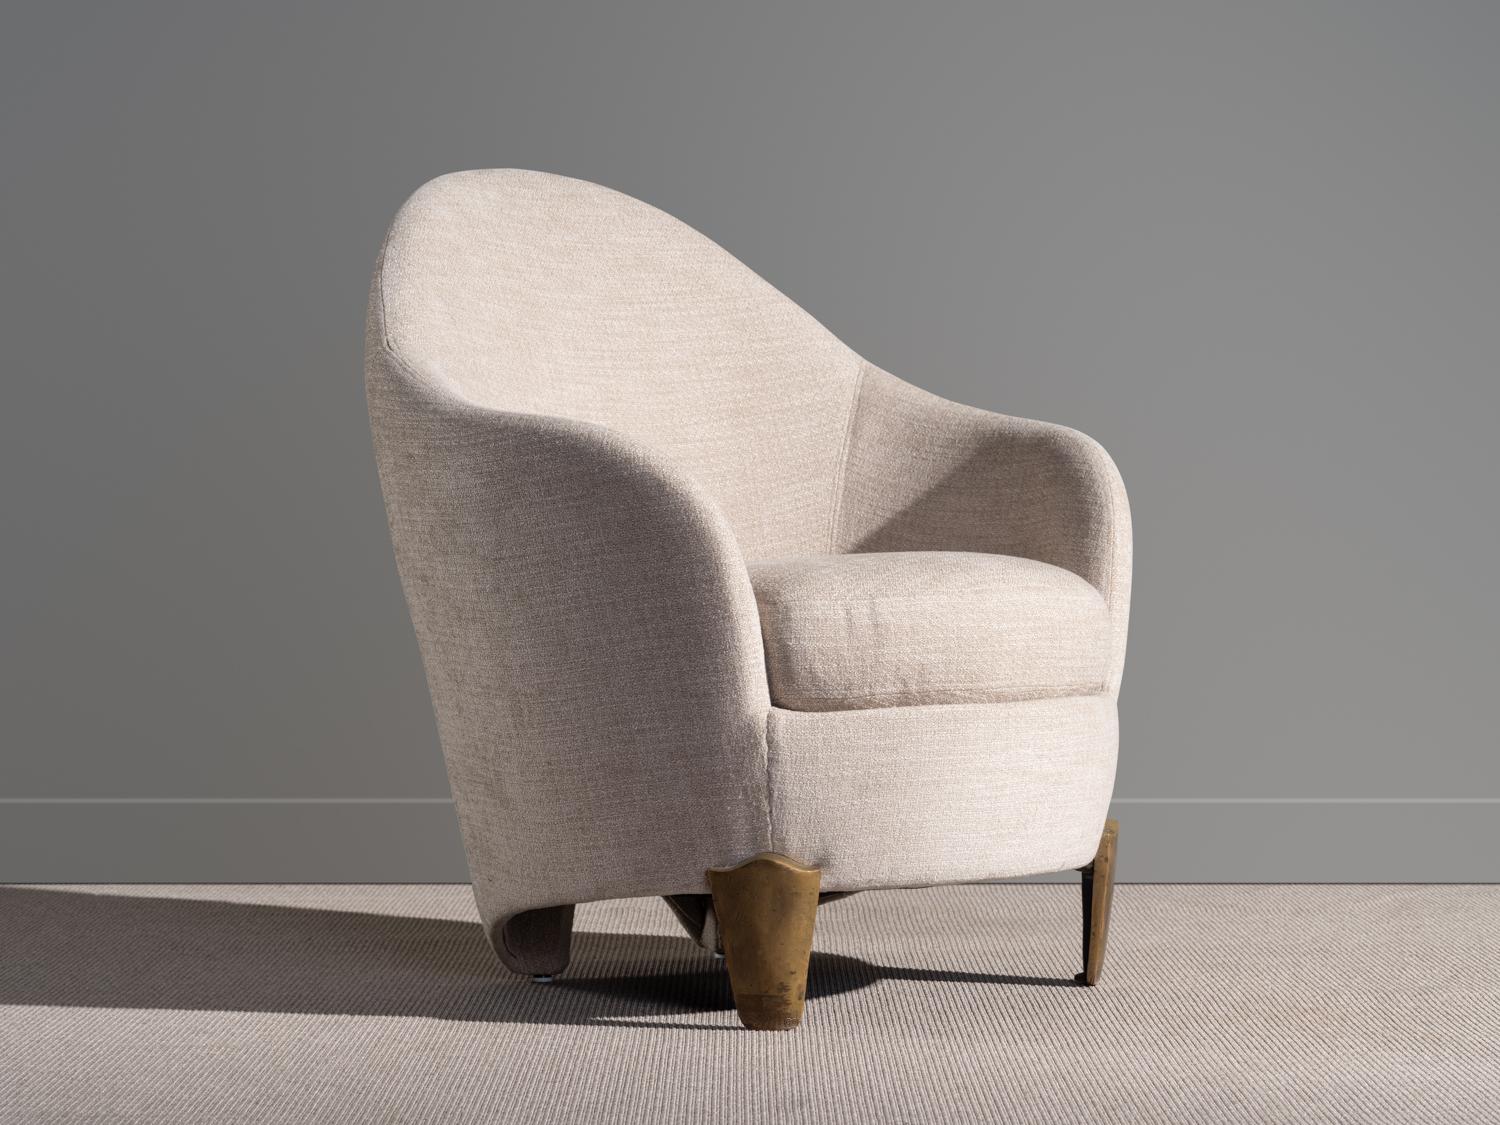 Armchair upholstered in a beige, tightly woven boucle fabric. Model 